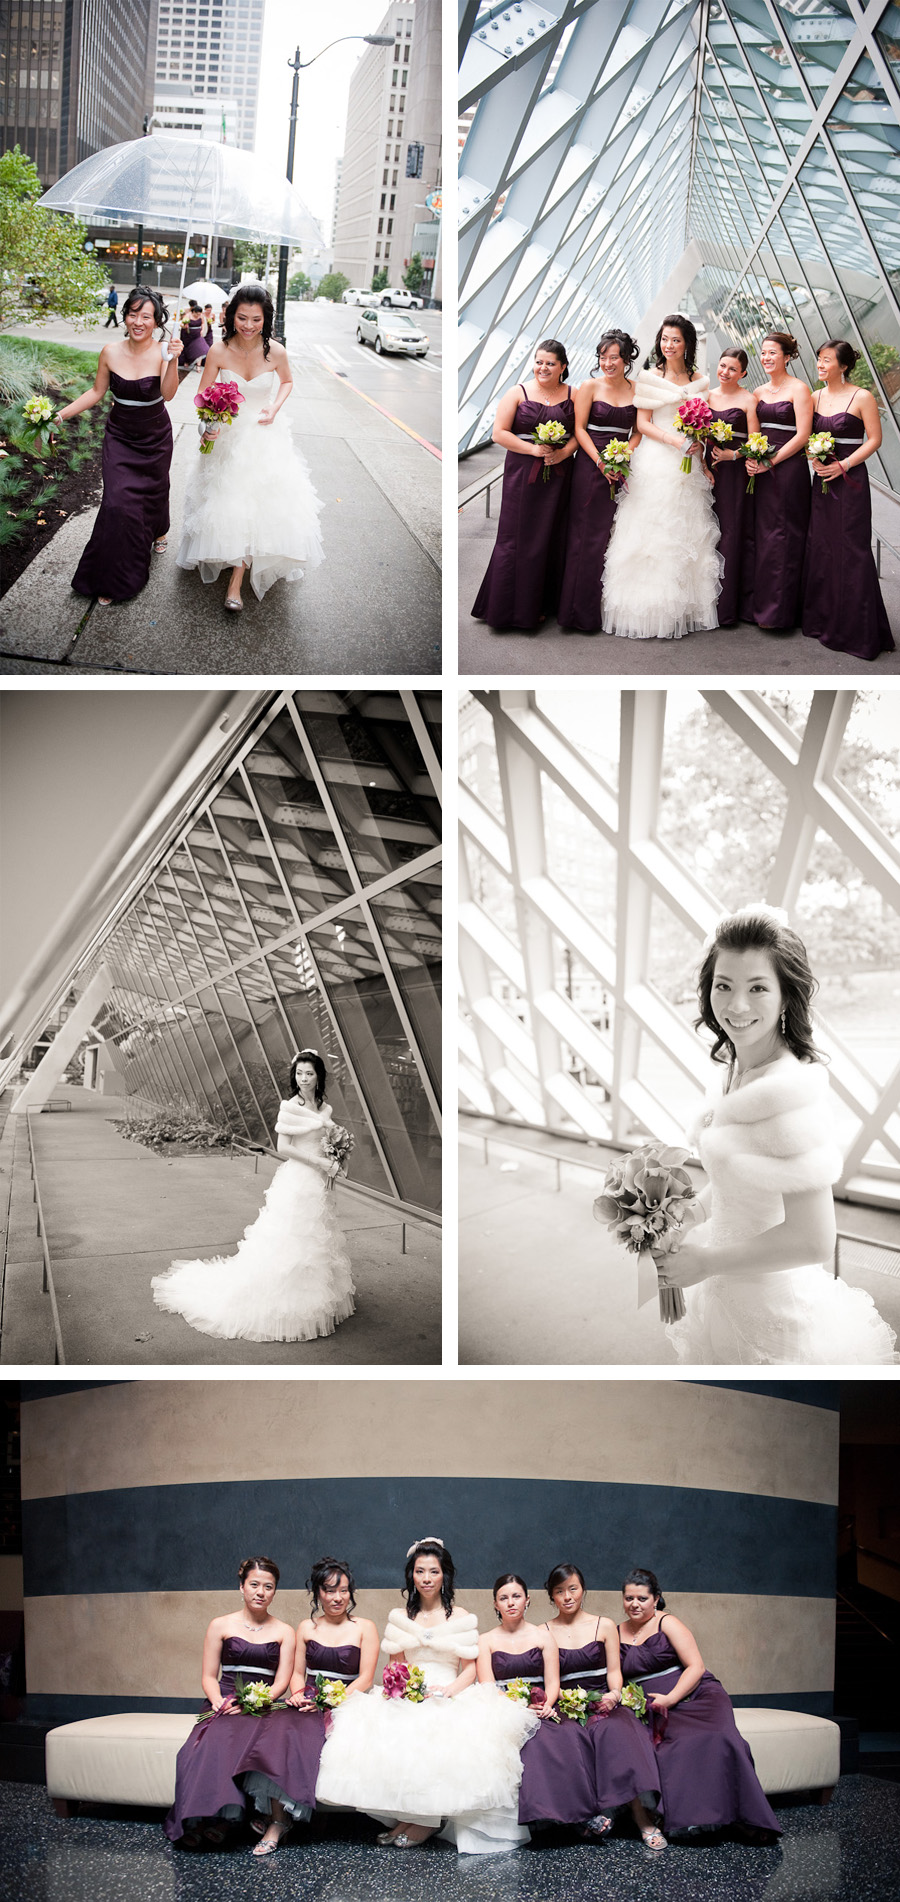 Seattle Photographer does bridal portraits at Library.